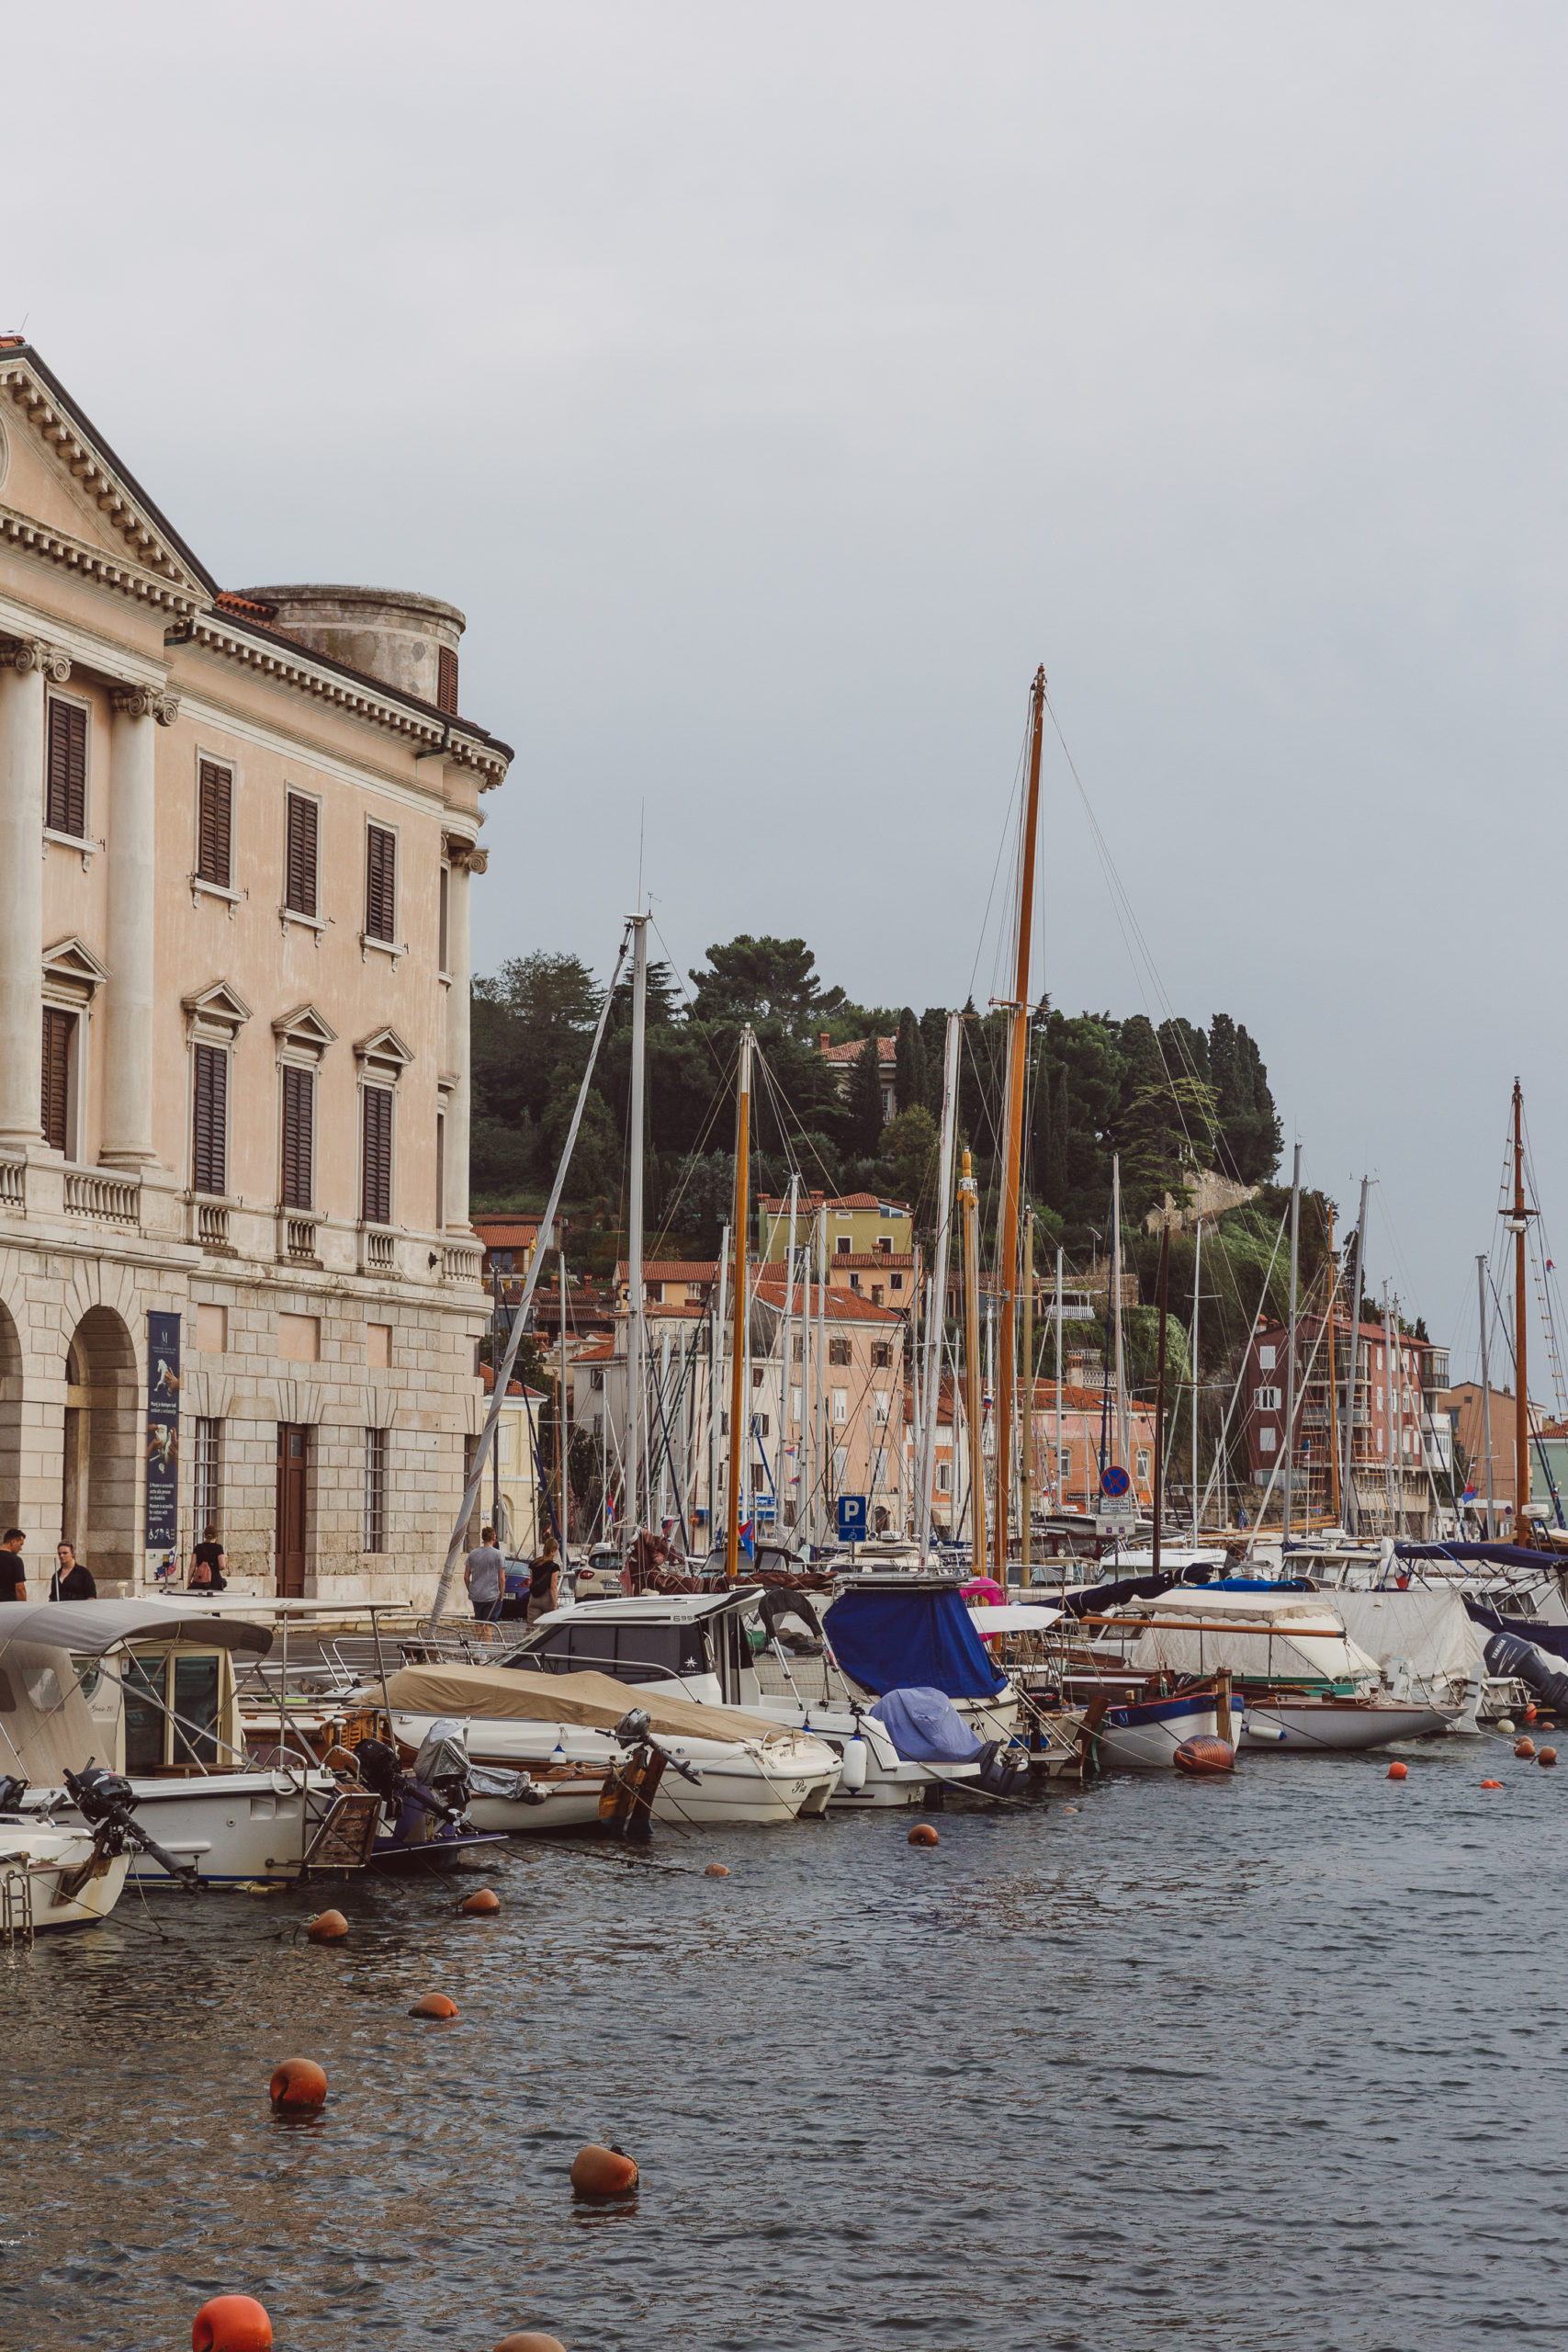 Piran - A Picturesque seaside town